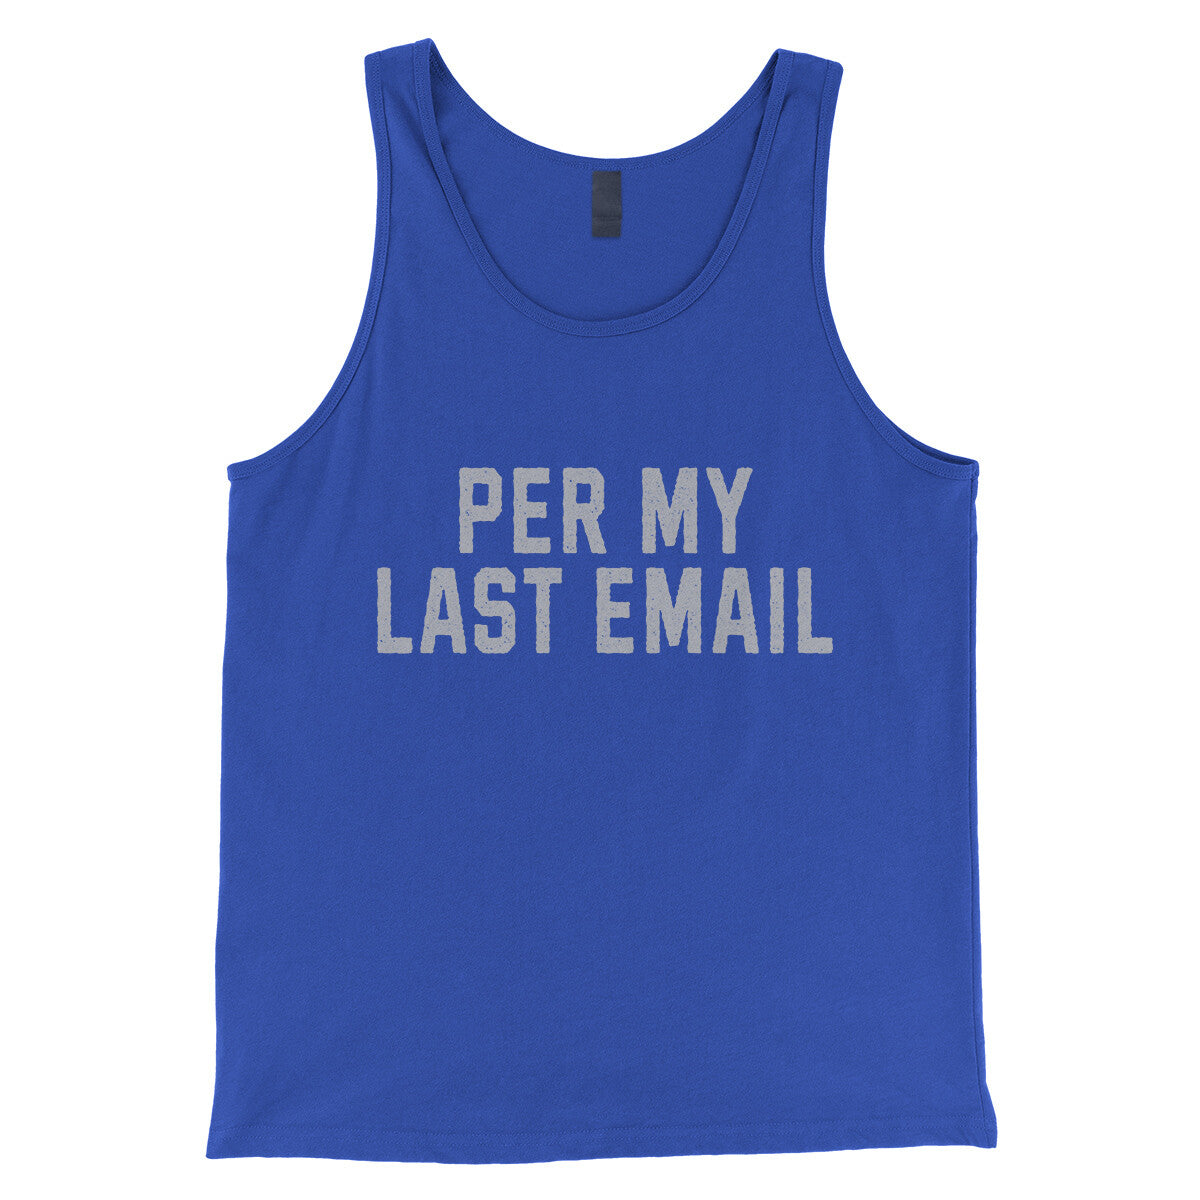 Per My Last Email in True Royal Color